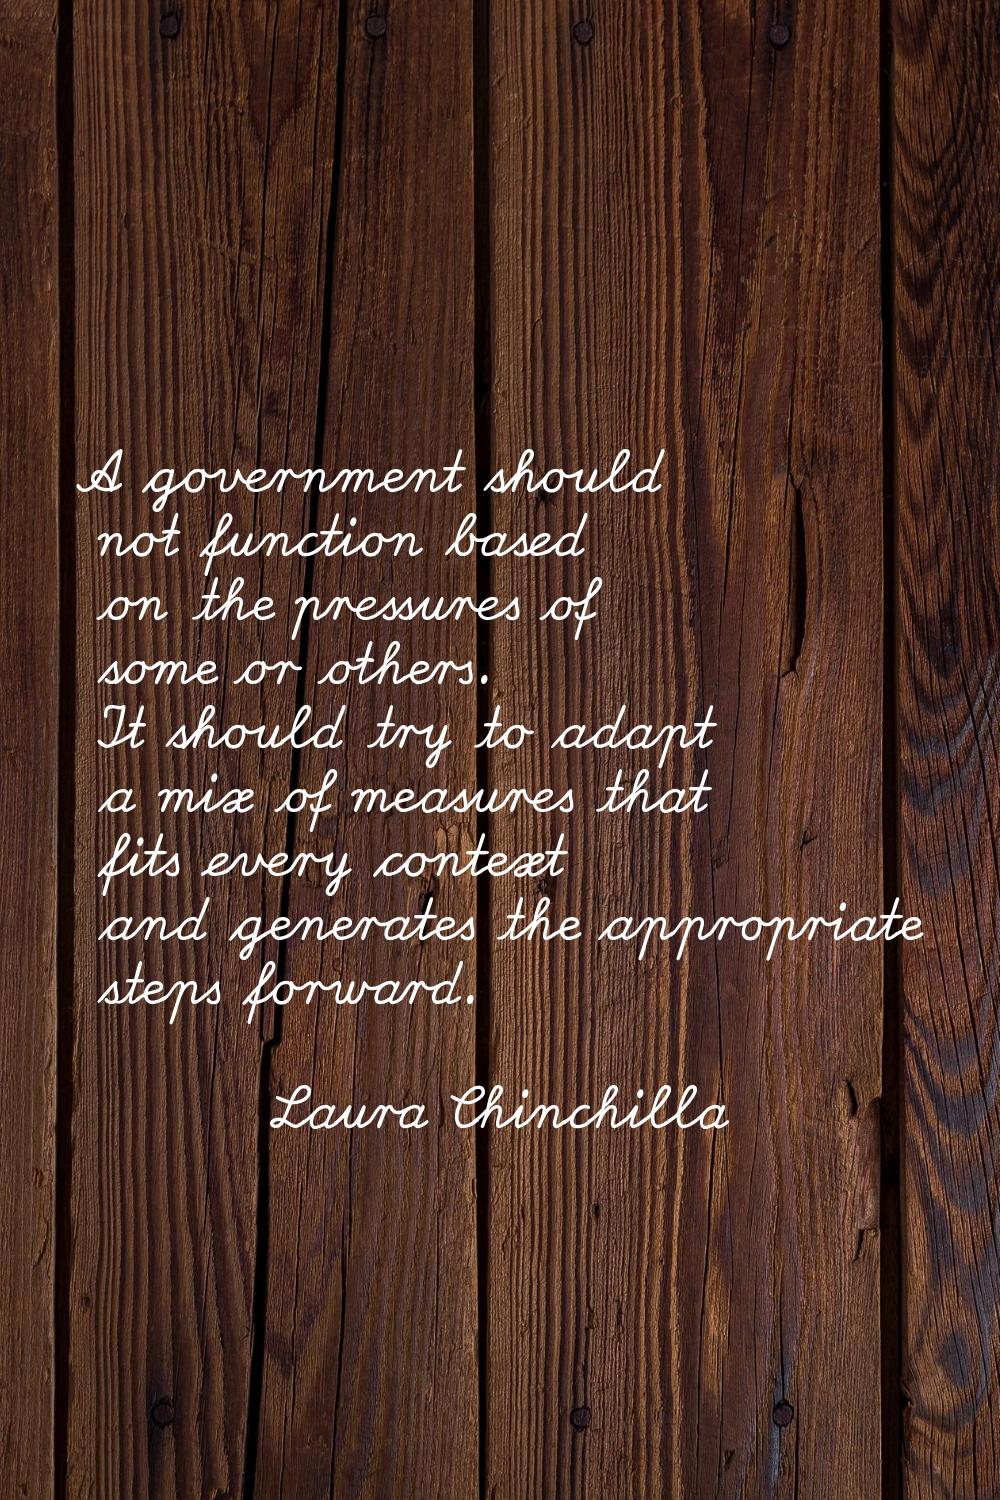 A government should not function based on the pressures of some or others. It should try to adapt a